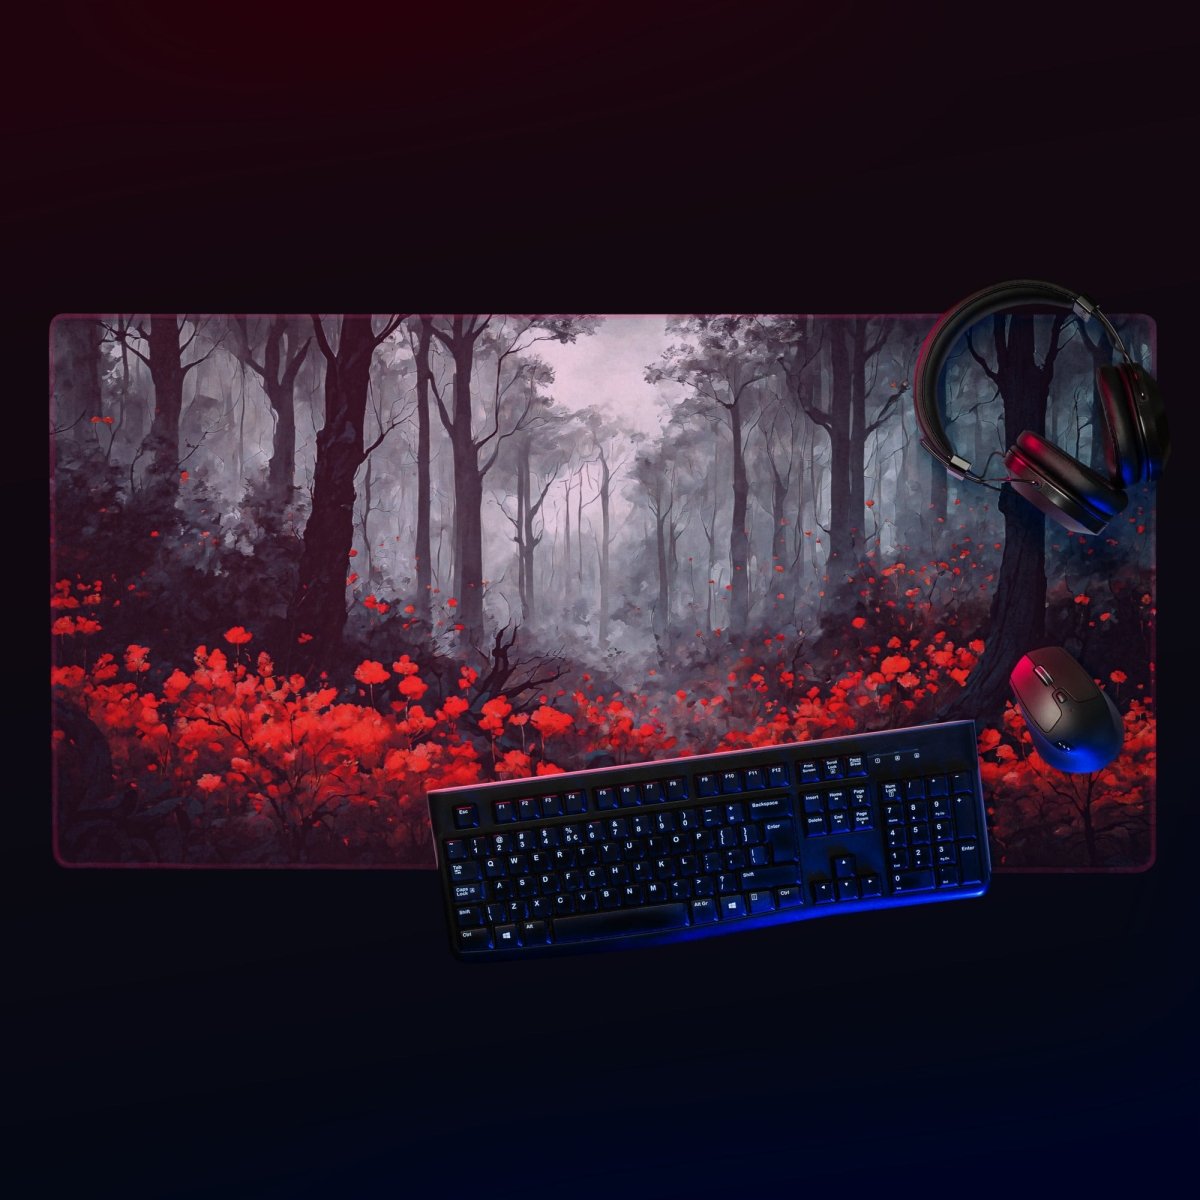 Hazy night woods - Gaming mouse pad - Ever colorful